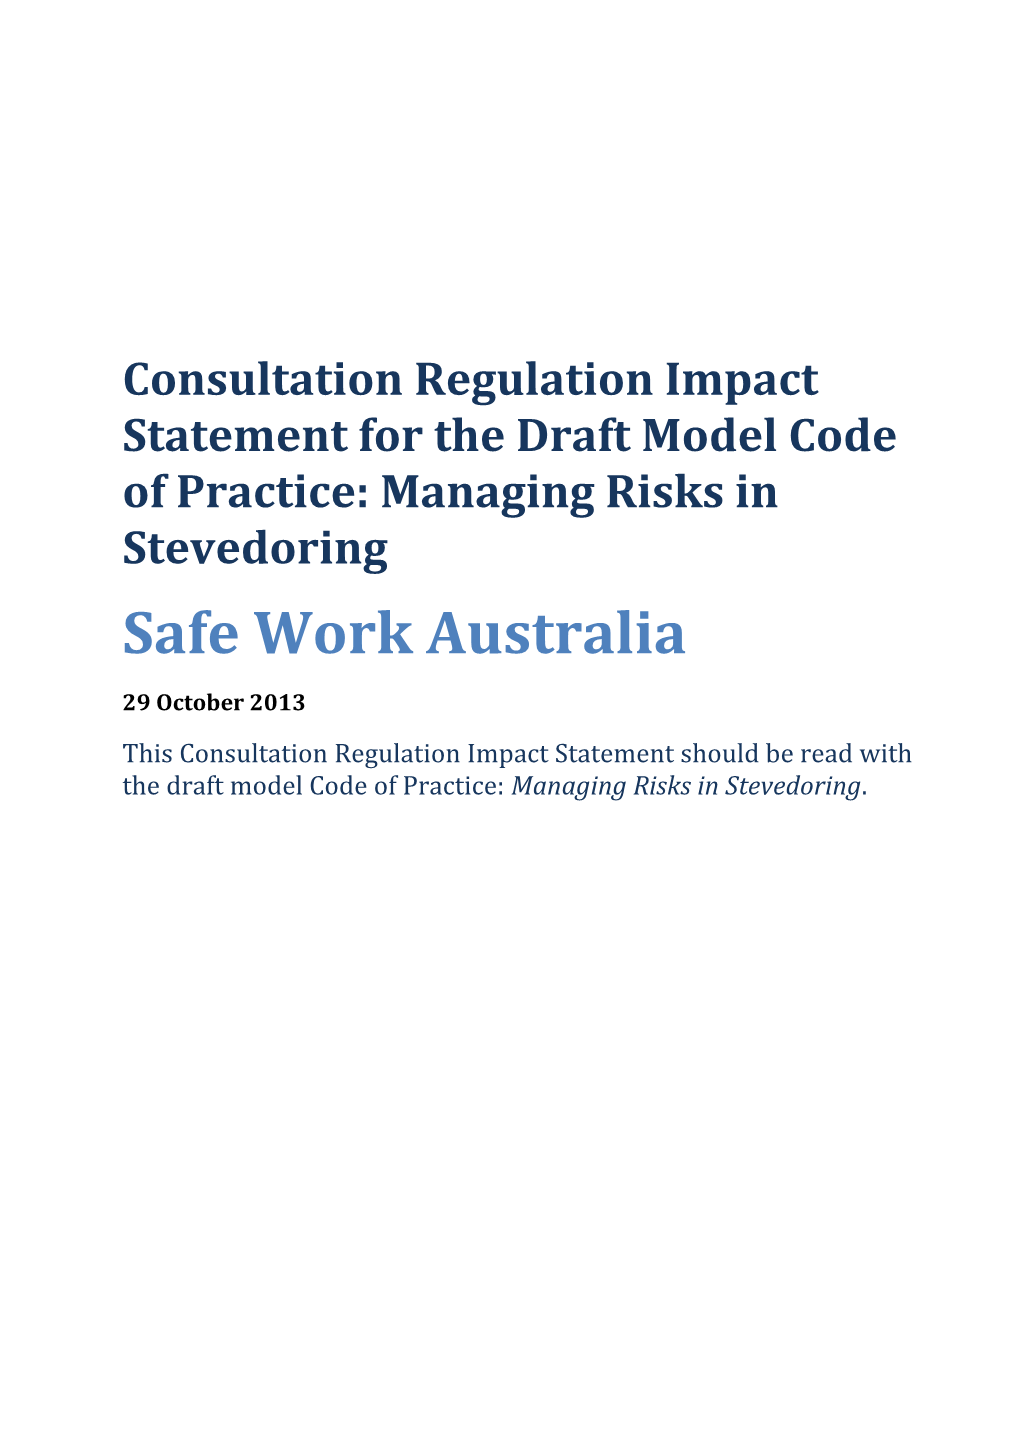 Consultation Regulation Impact Statement for the Draft Model Code of Practice: Managing